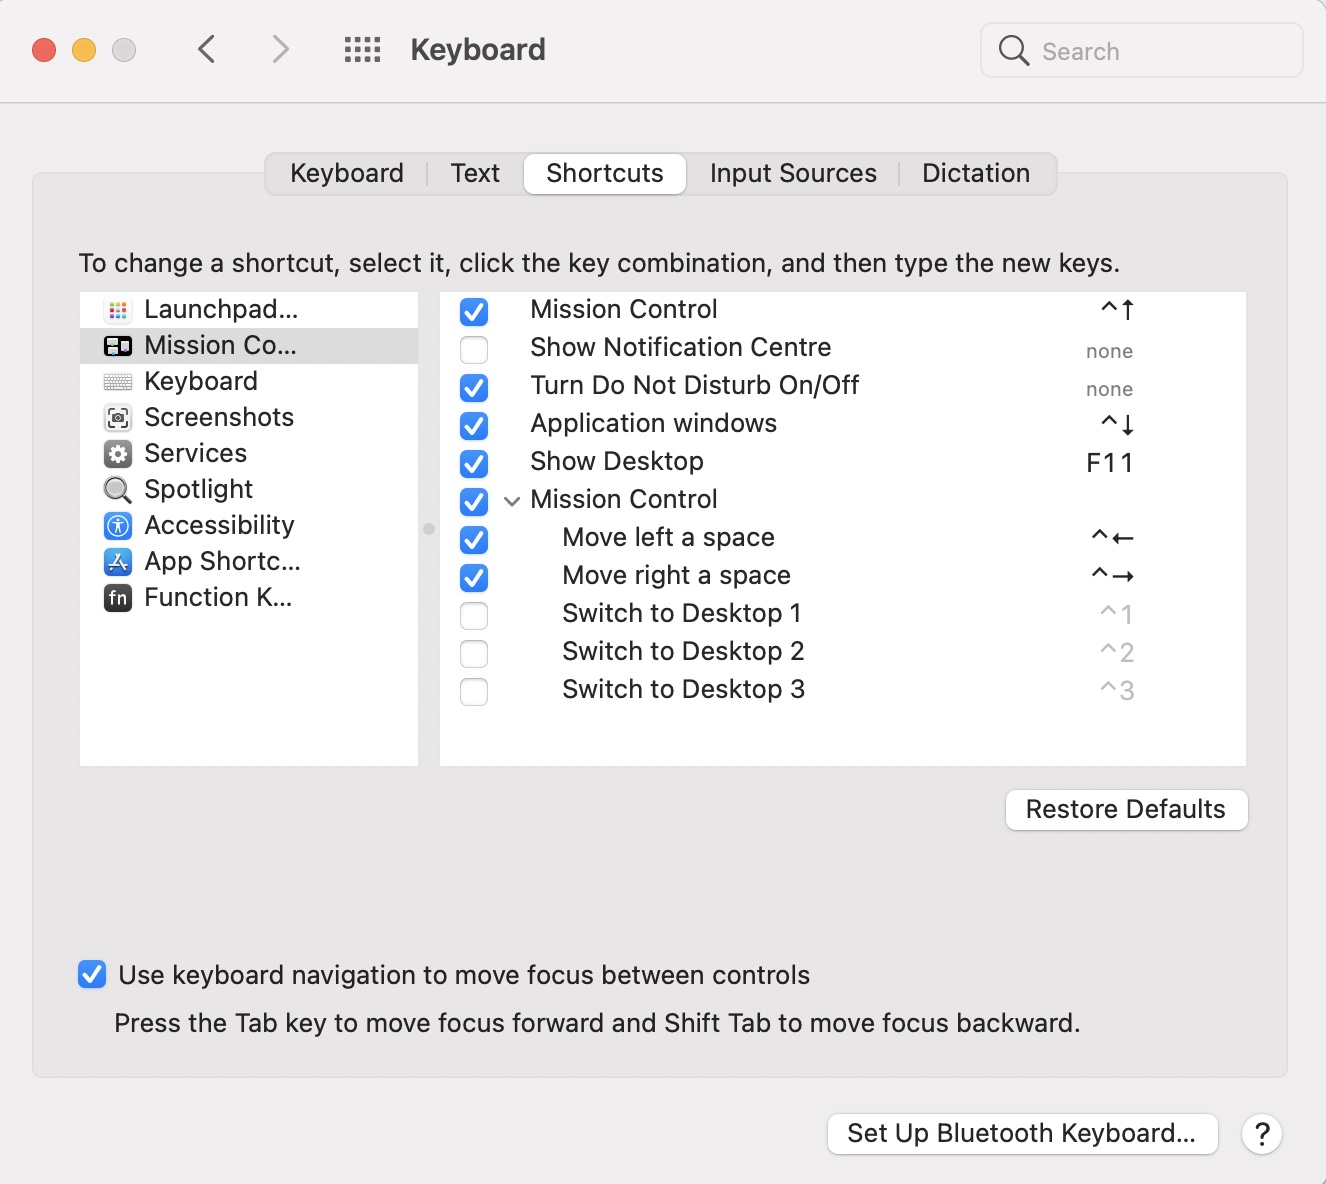 The macOS Keyboard Shortcuts settings showing "Use keyboard navigation to move focus between controls" selected